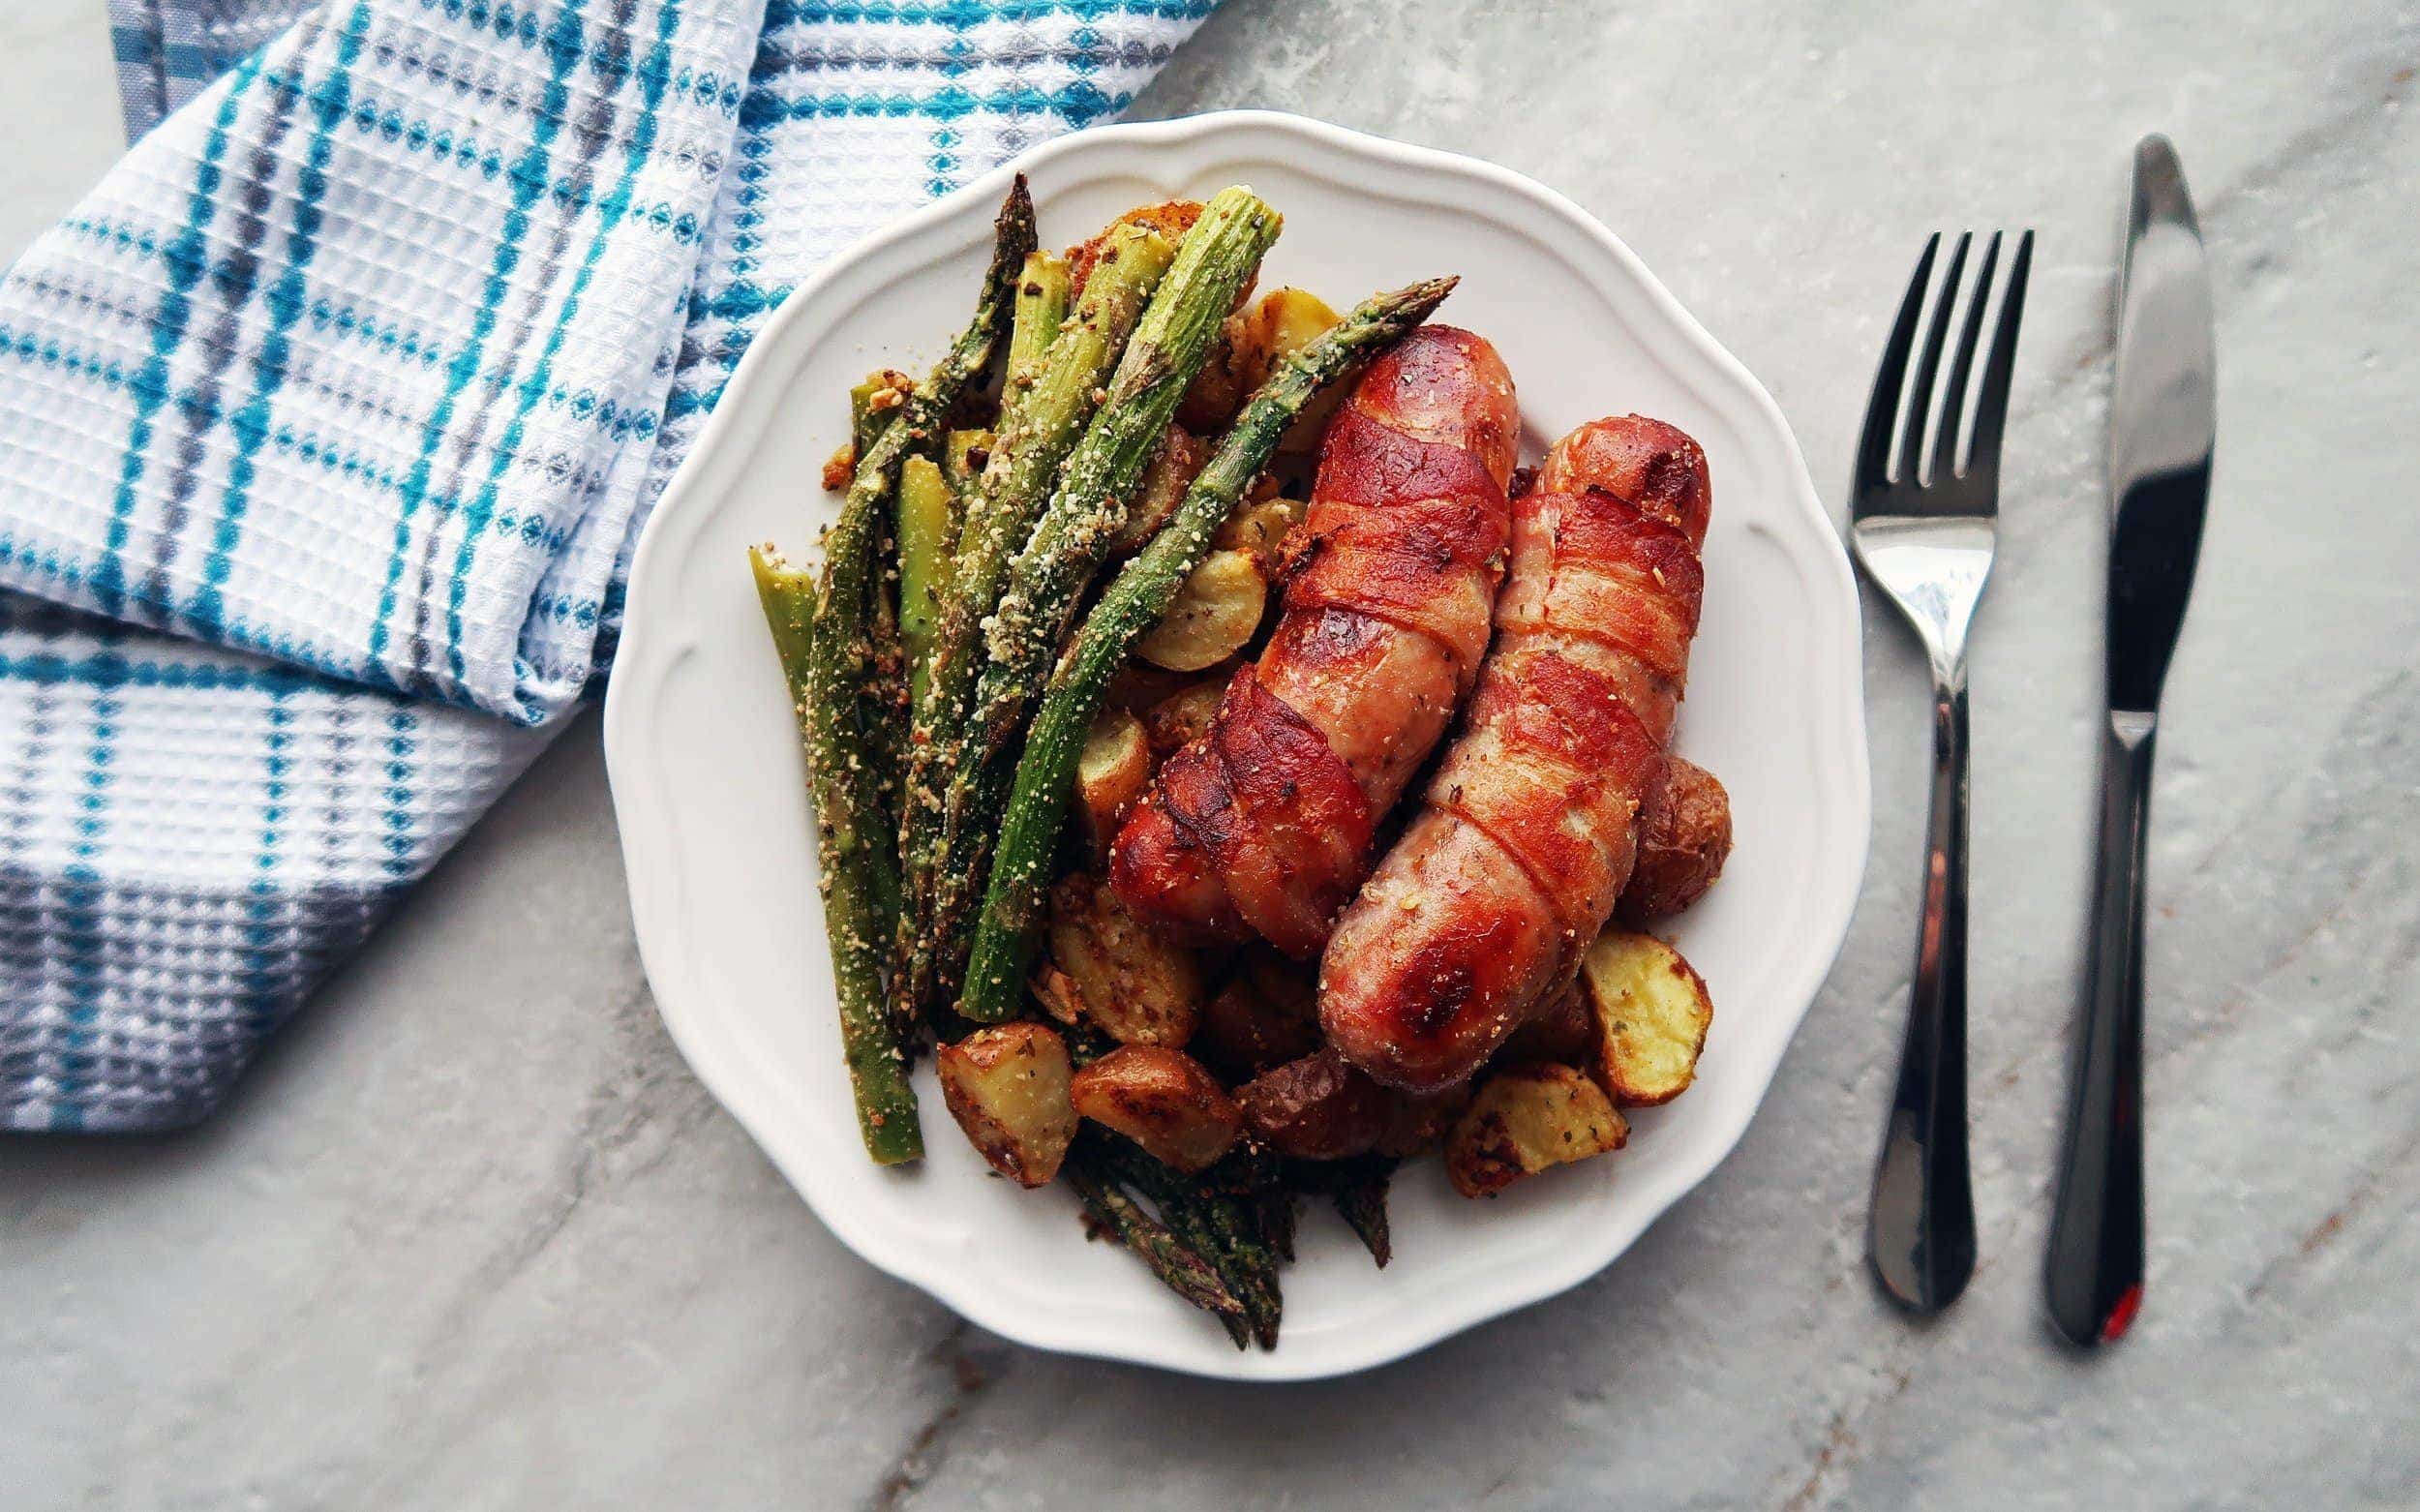 Bacon-Wrapped Sausages with Garlic Parmesan Asparagus and Potatoes